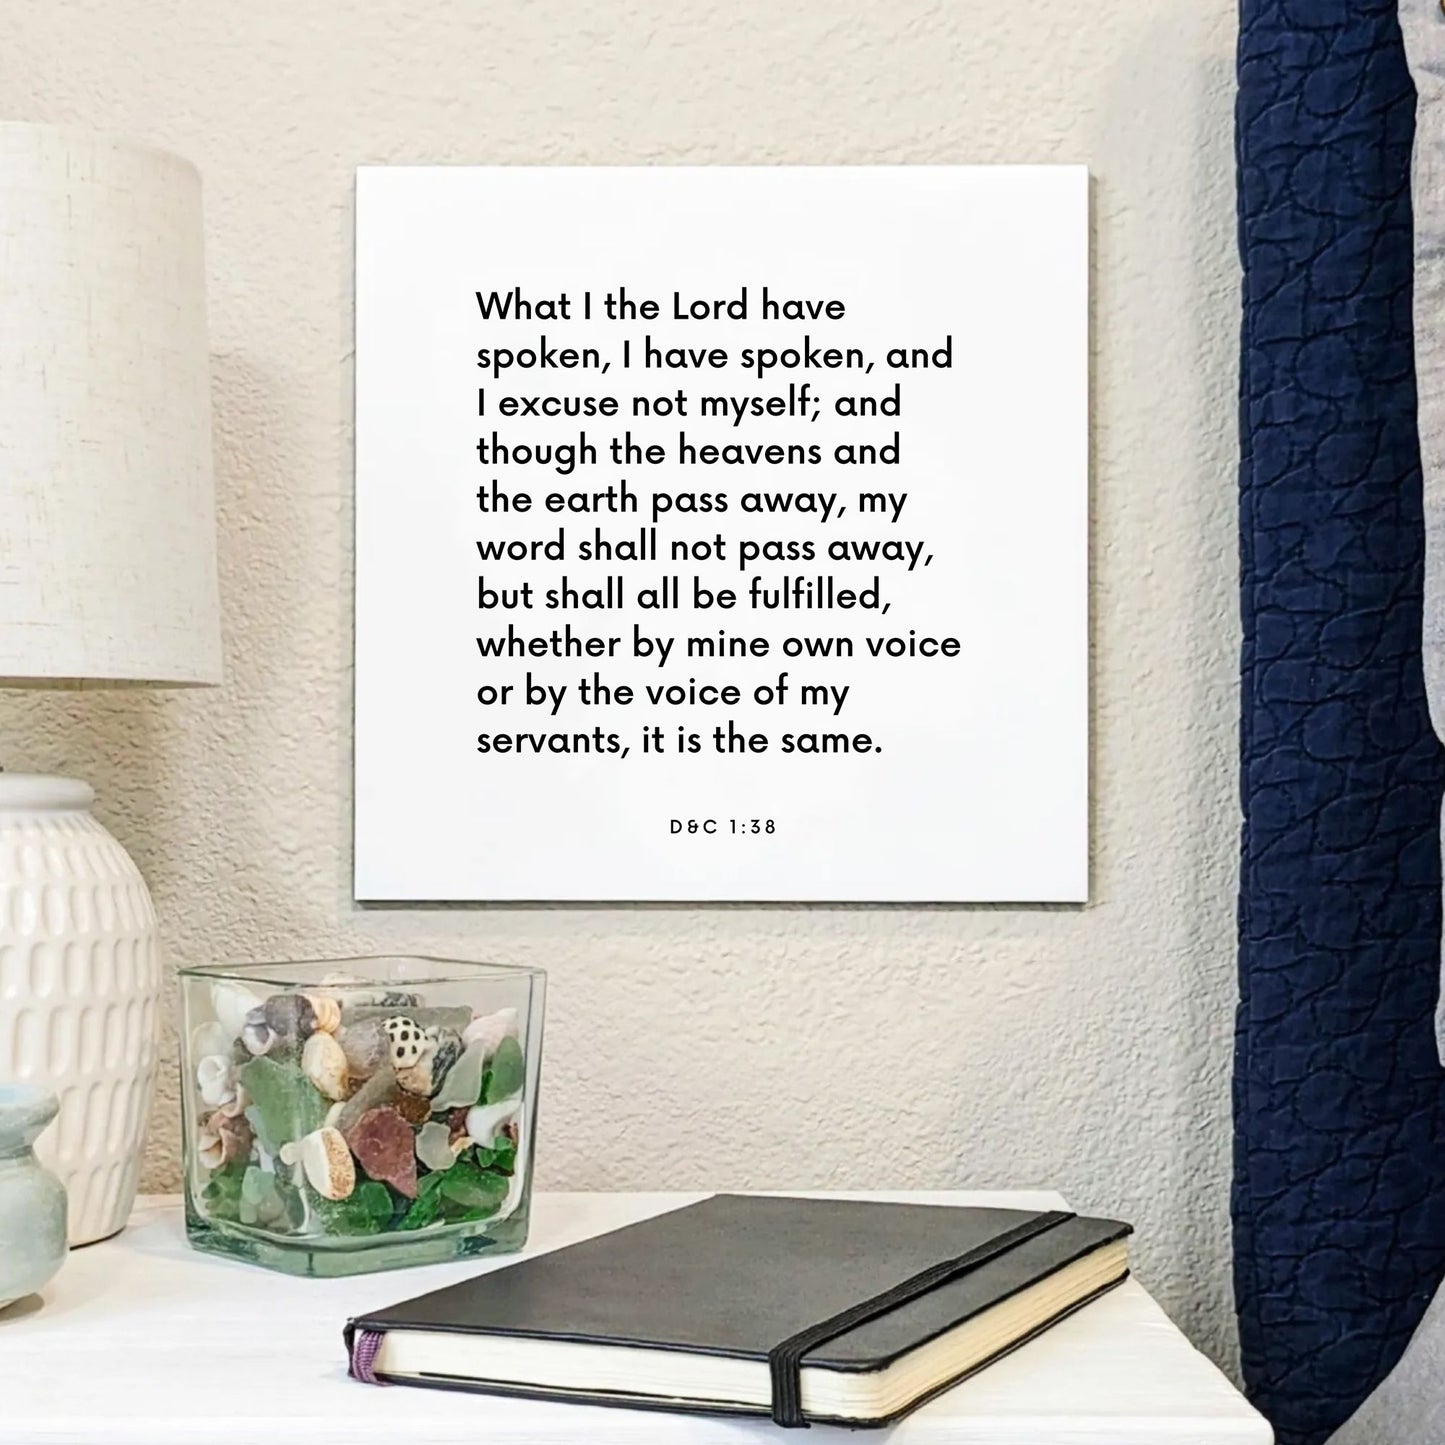 Bedside mouting of the scripture tile for D&C 1:38 - "Whether by mine own voice or by the voice of my servants"